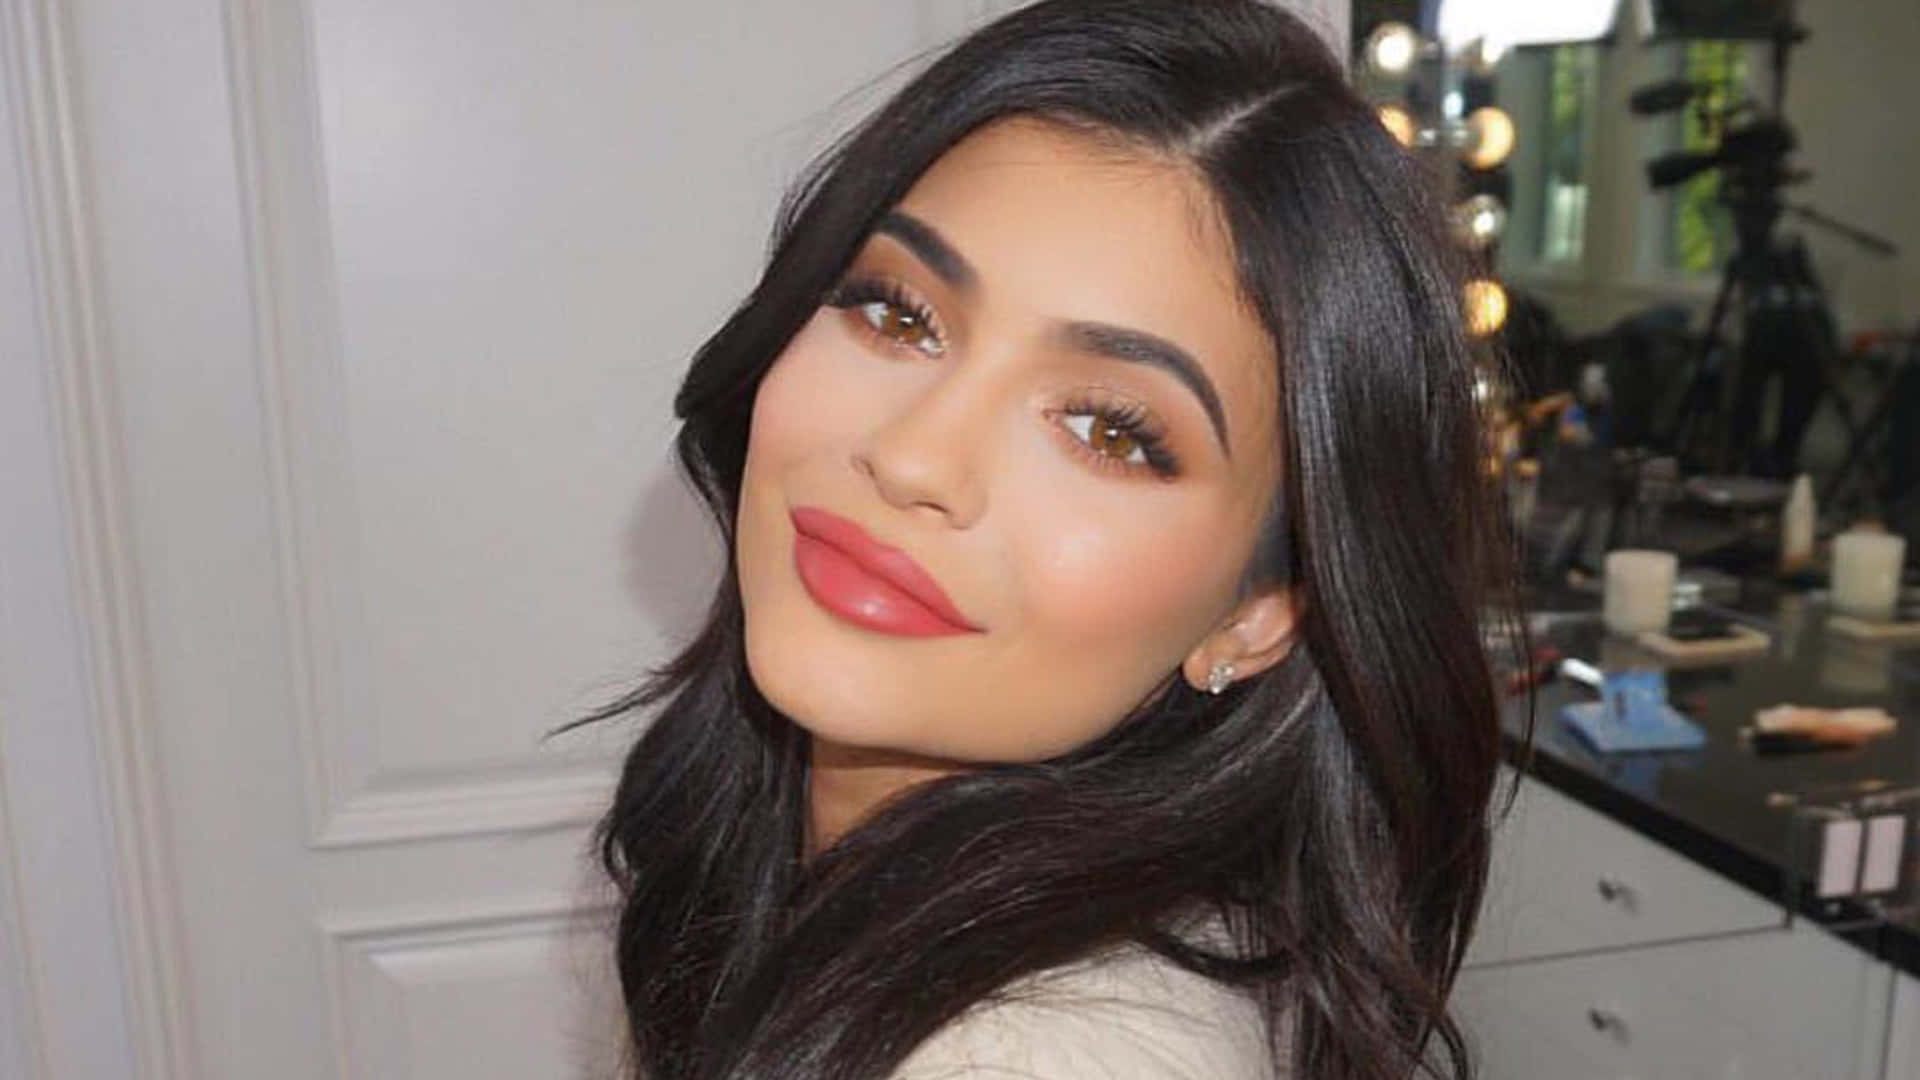 Kyliejenner Stupisce Con Un Sofisticato Outfit Rosso.